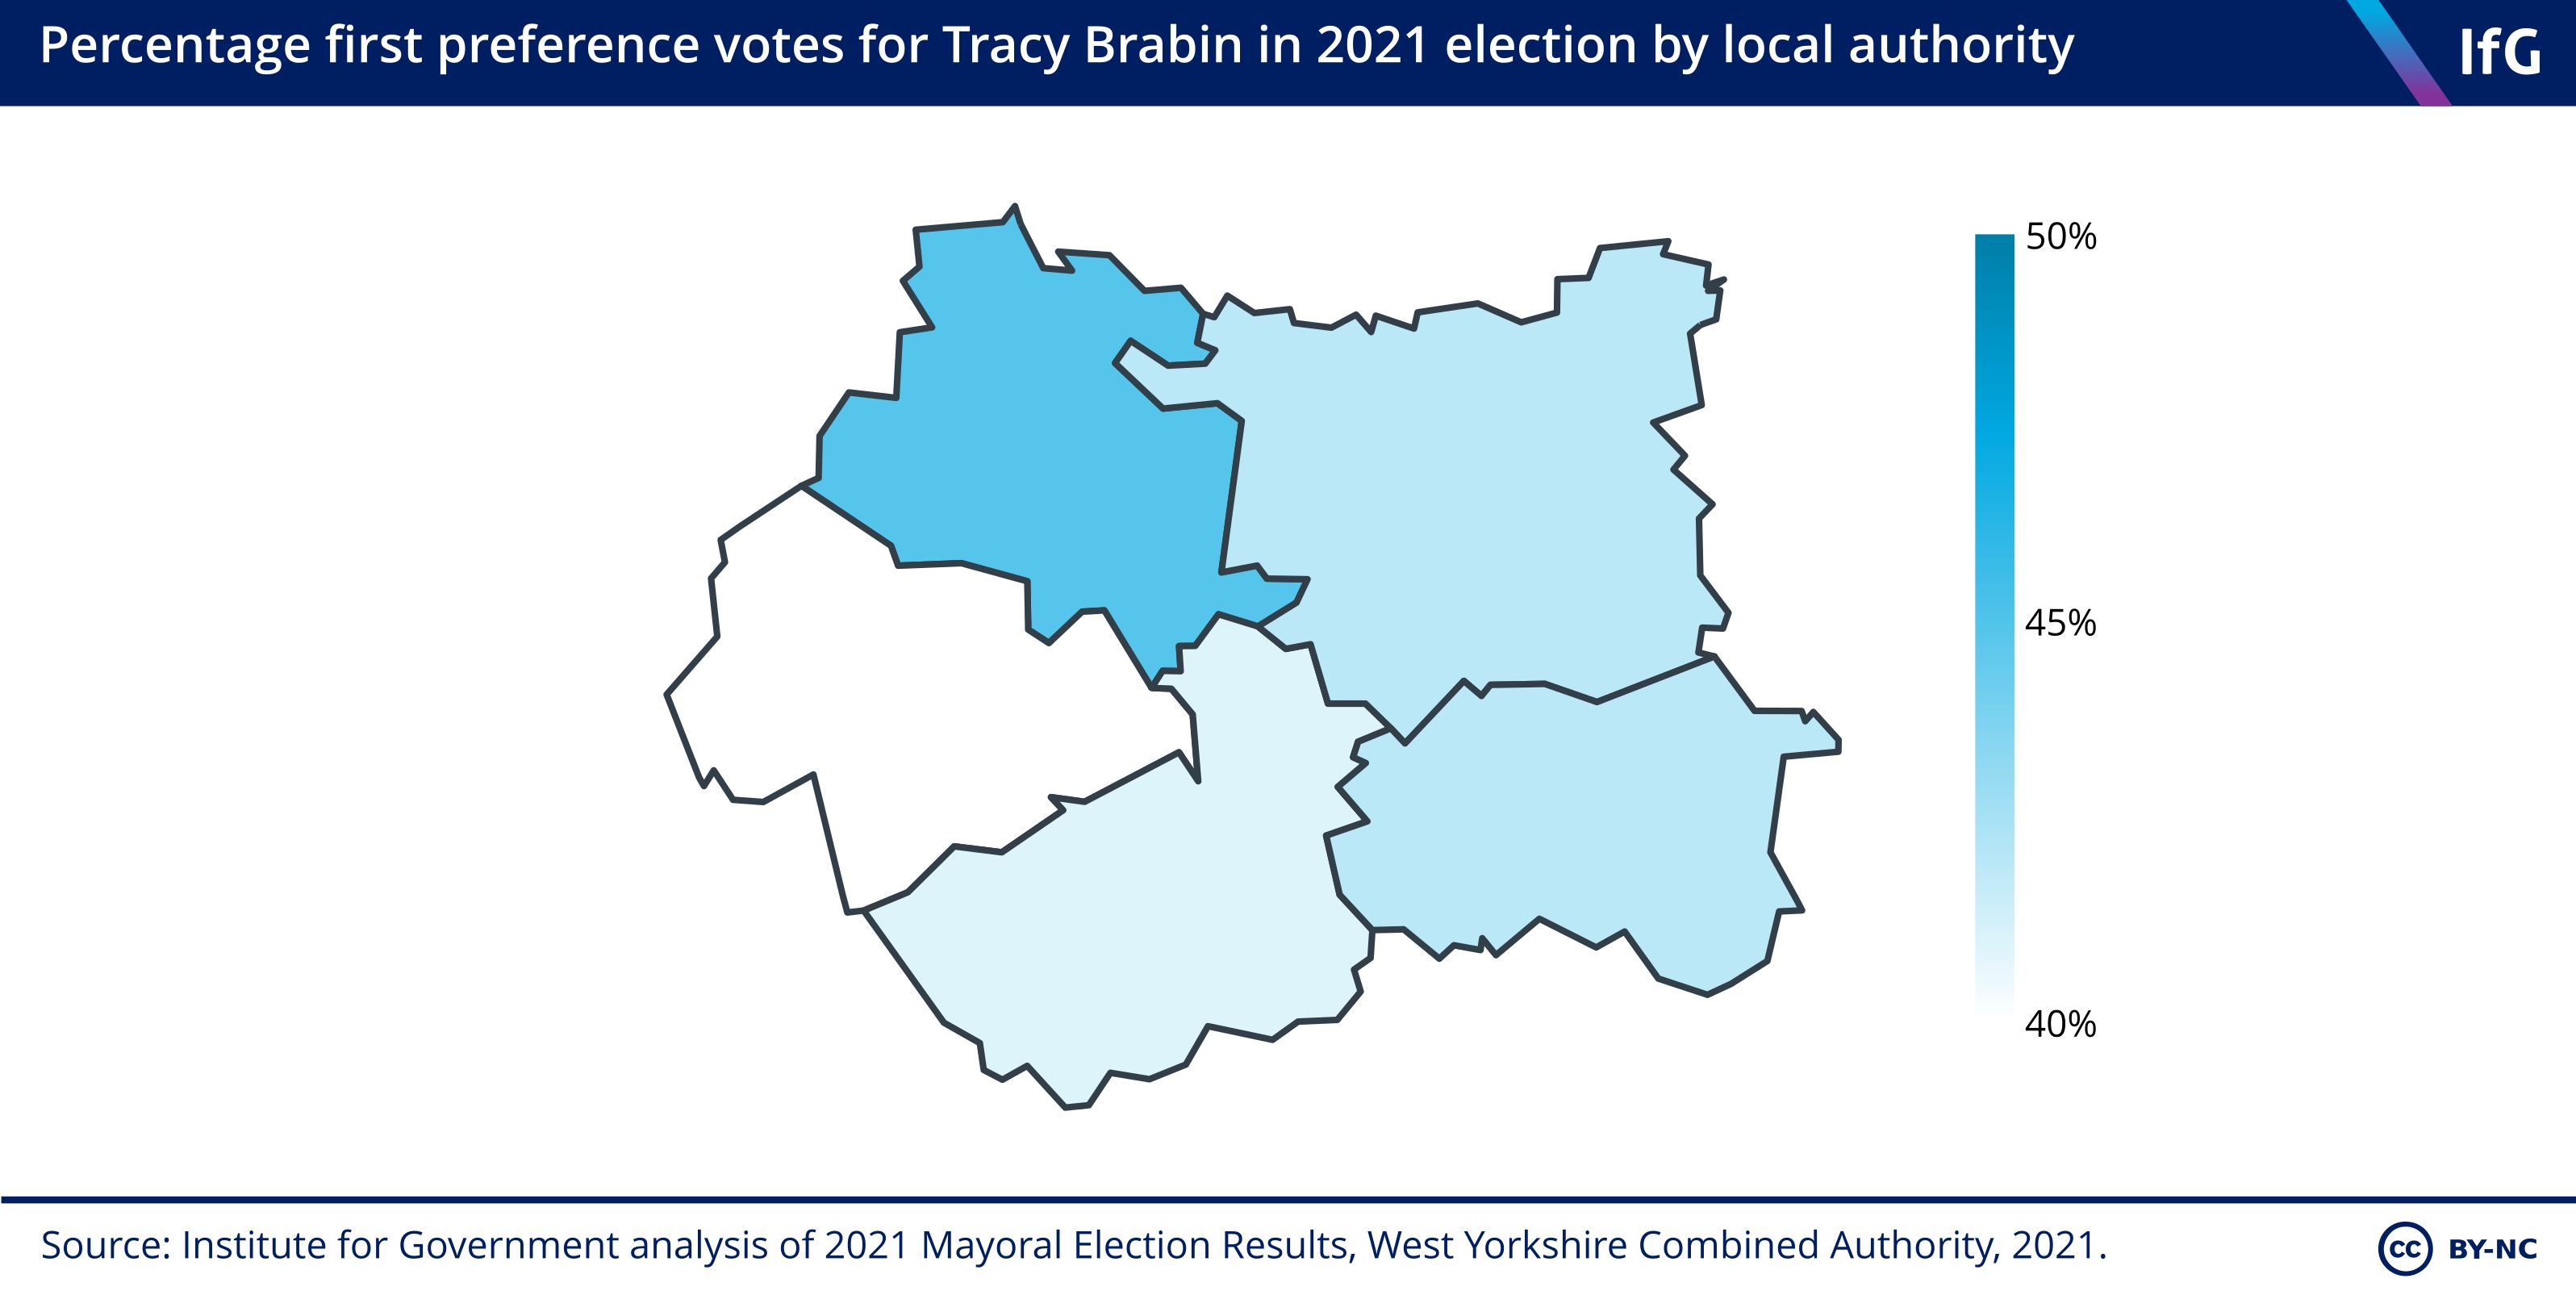 Percentage first preference votes for Tracy Brabin in 2021 election